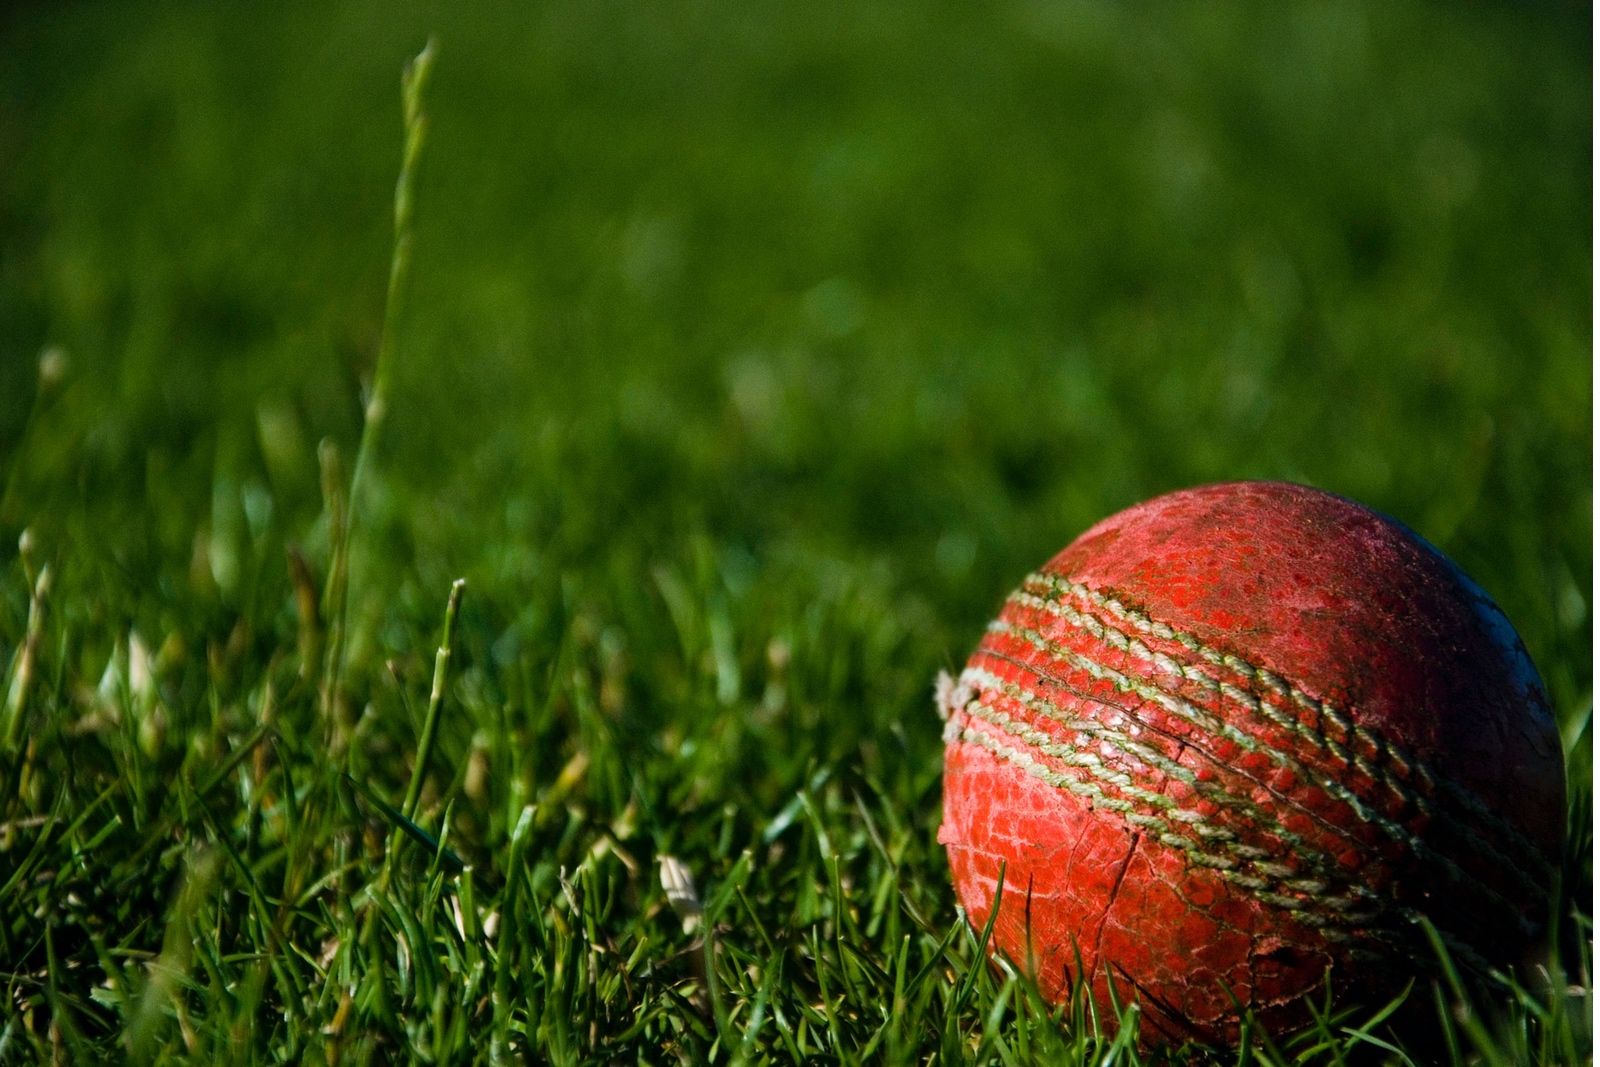 Amazon Prime Video looking to secure ICC live cricket rights